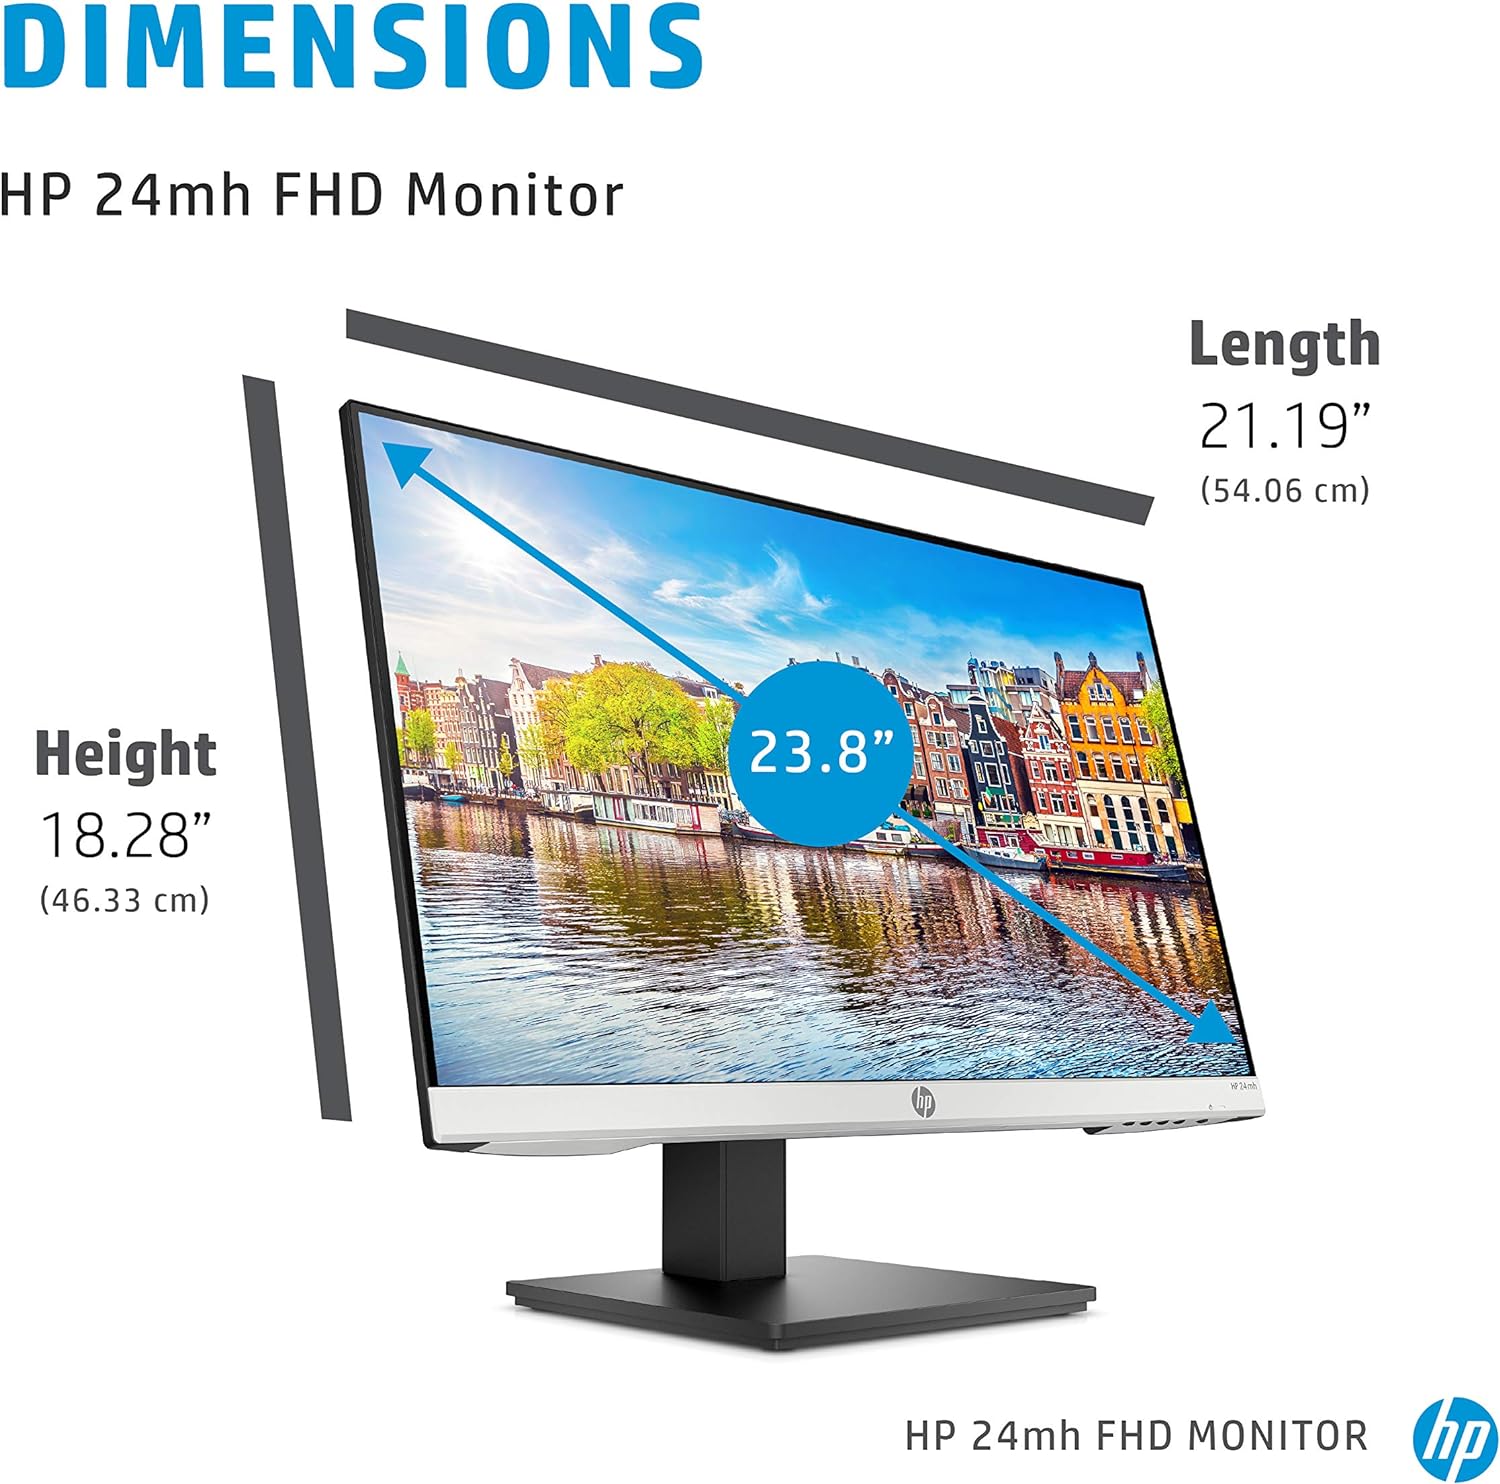 Observation of HP 24mh FHD Computer Monitor 23.8-Inch IPS Display (1080p) - (1D0J9AA#ABA)